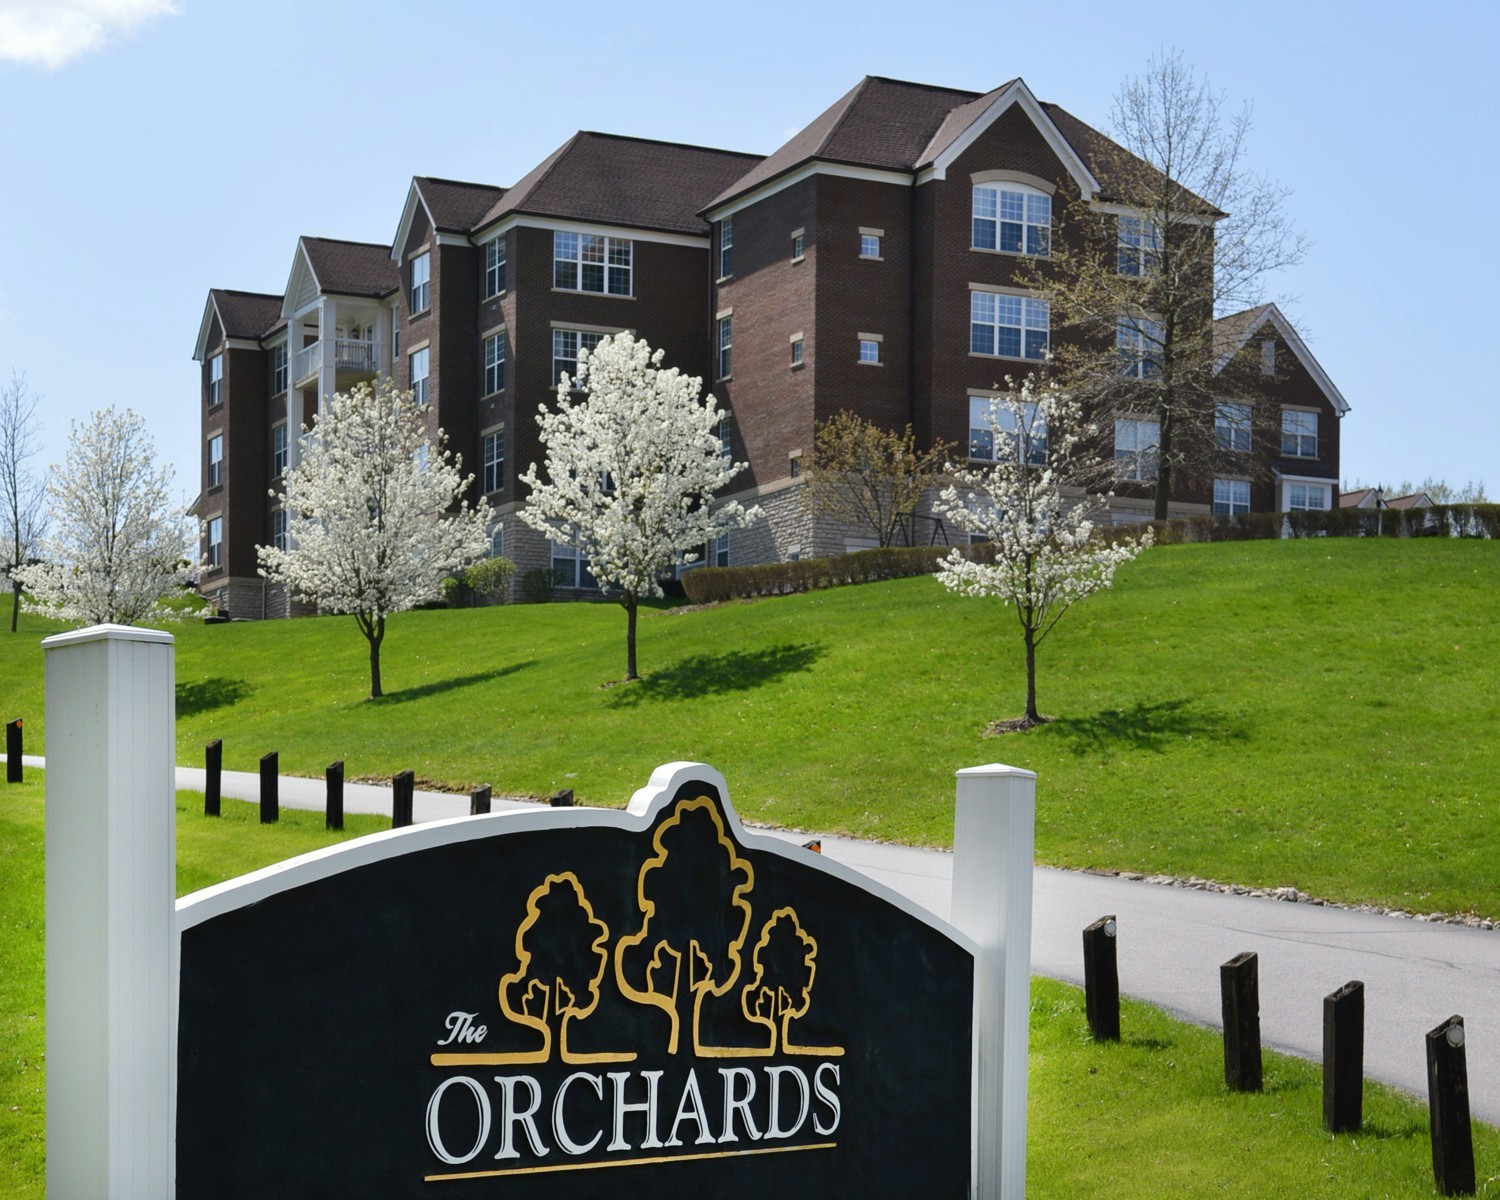 Nestled in the foothills of the Appalachians, The Orchards communities offer serene environments. 